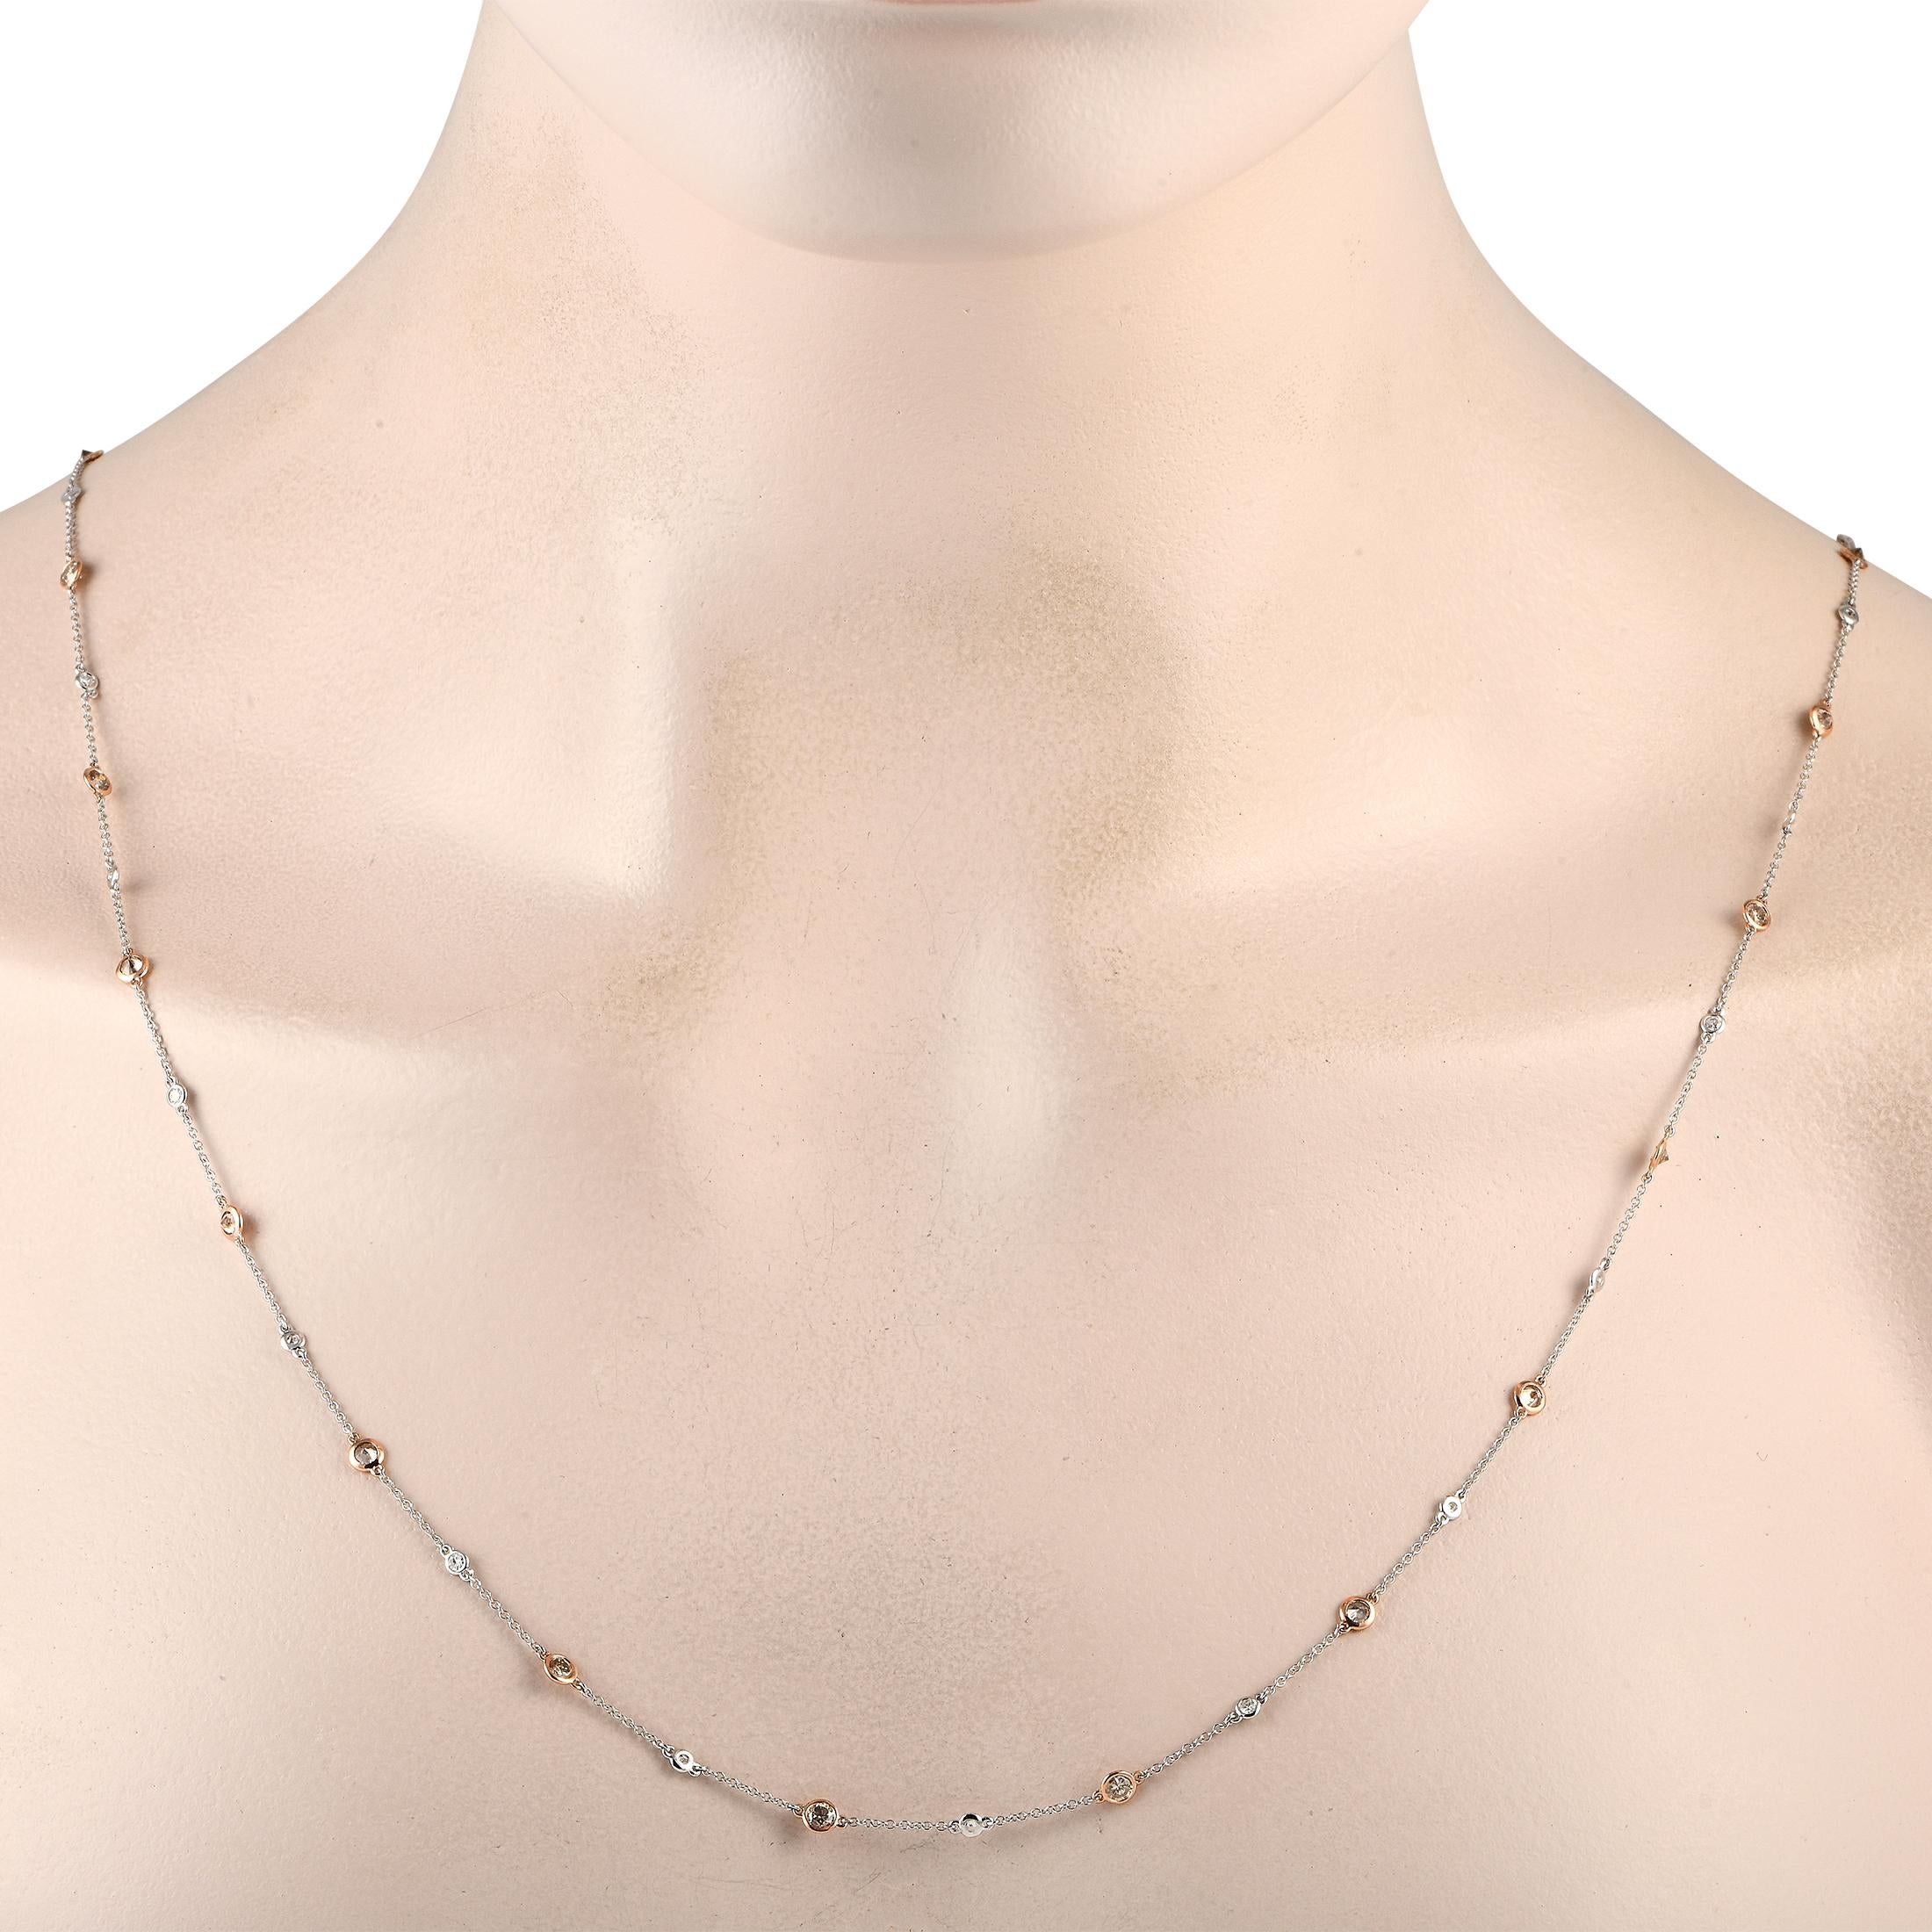 A stunning combination of 14K White Gold and 14K rose gold add texture and dimension to this elegant, understated necklace. This piece measures 31 long and comes complete with a series of sparkling diamonds totaling 3.23 carats.This jewelry piece is